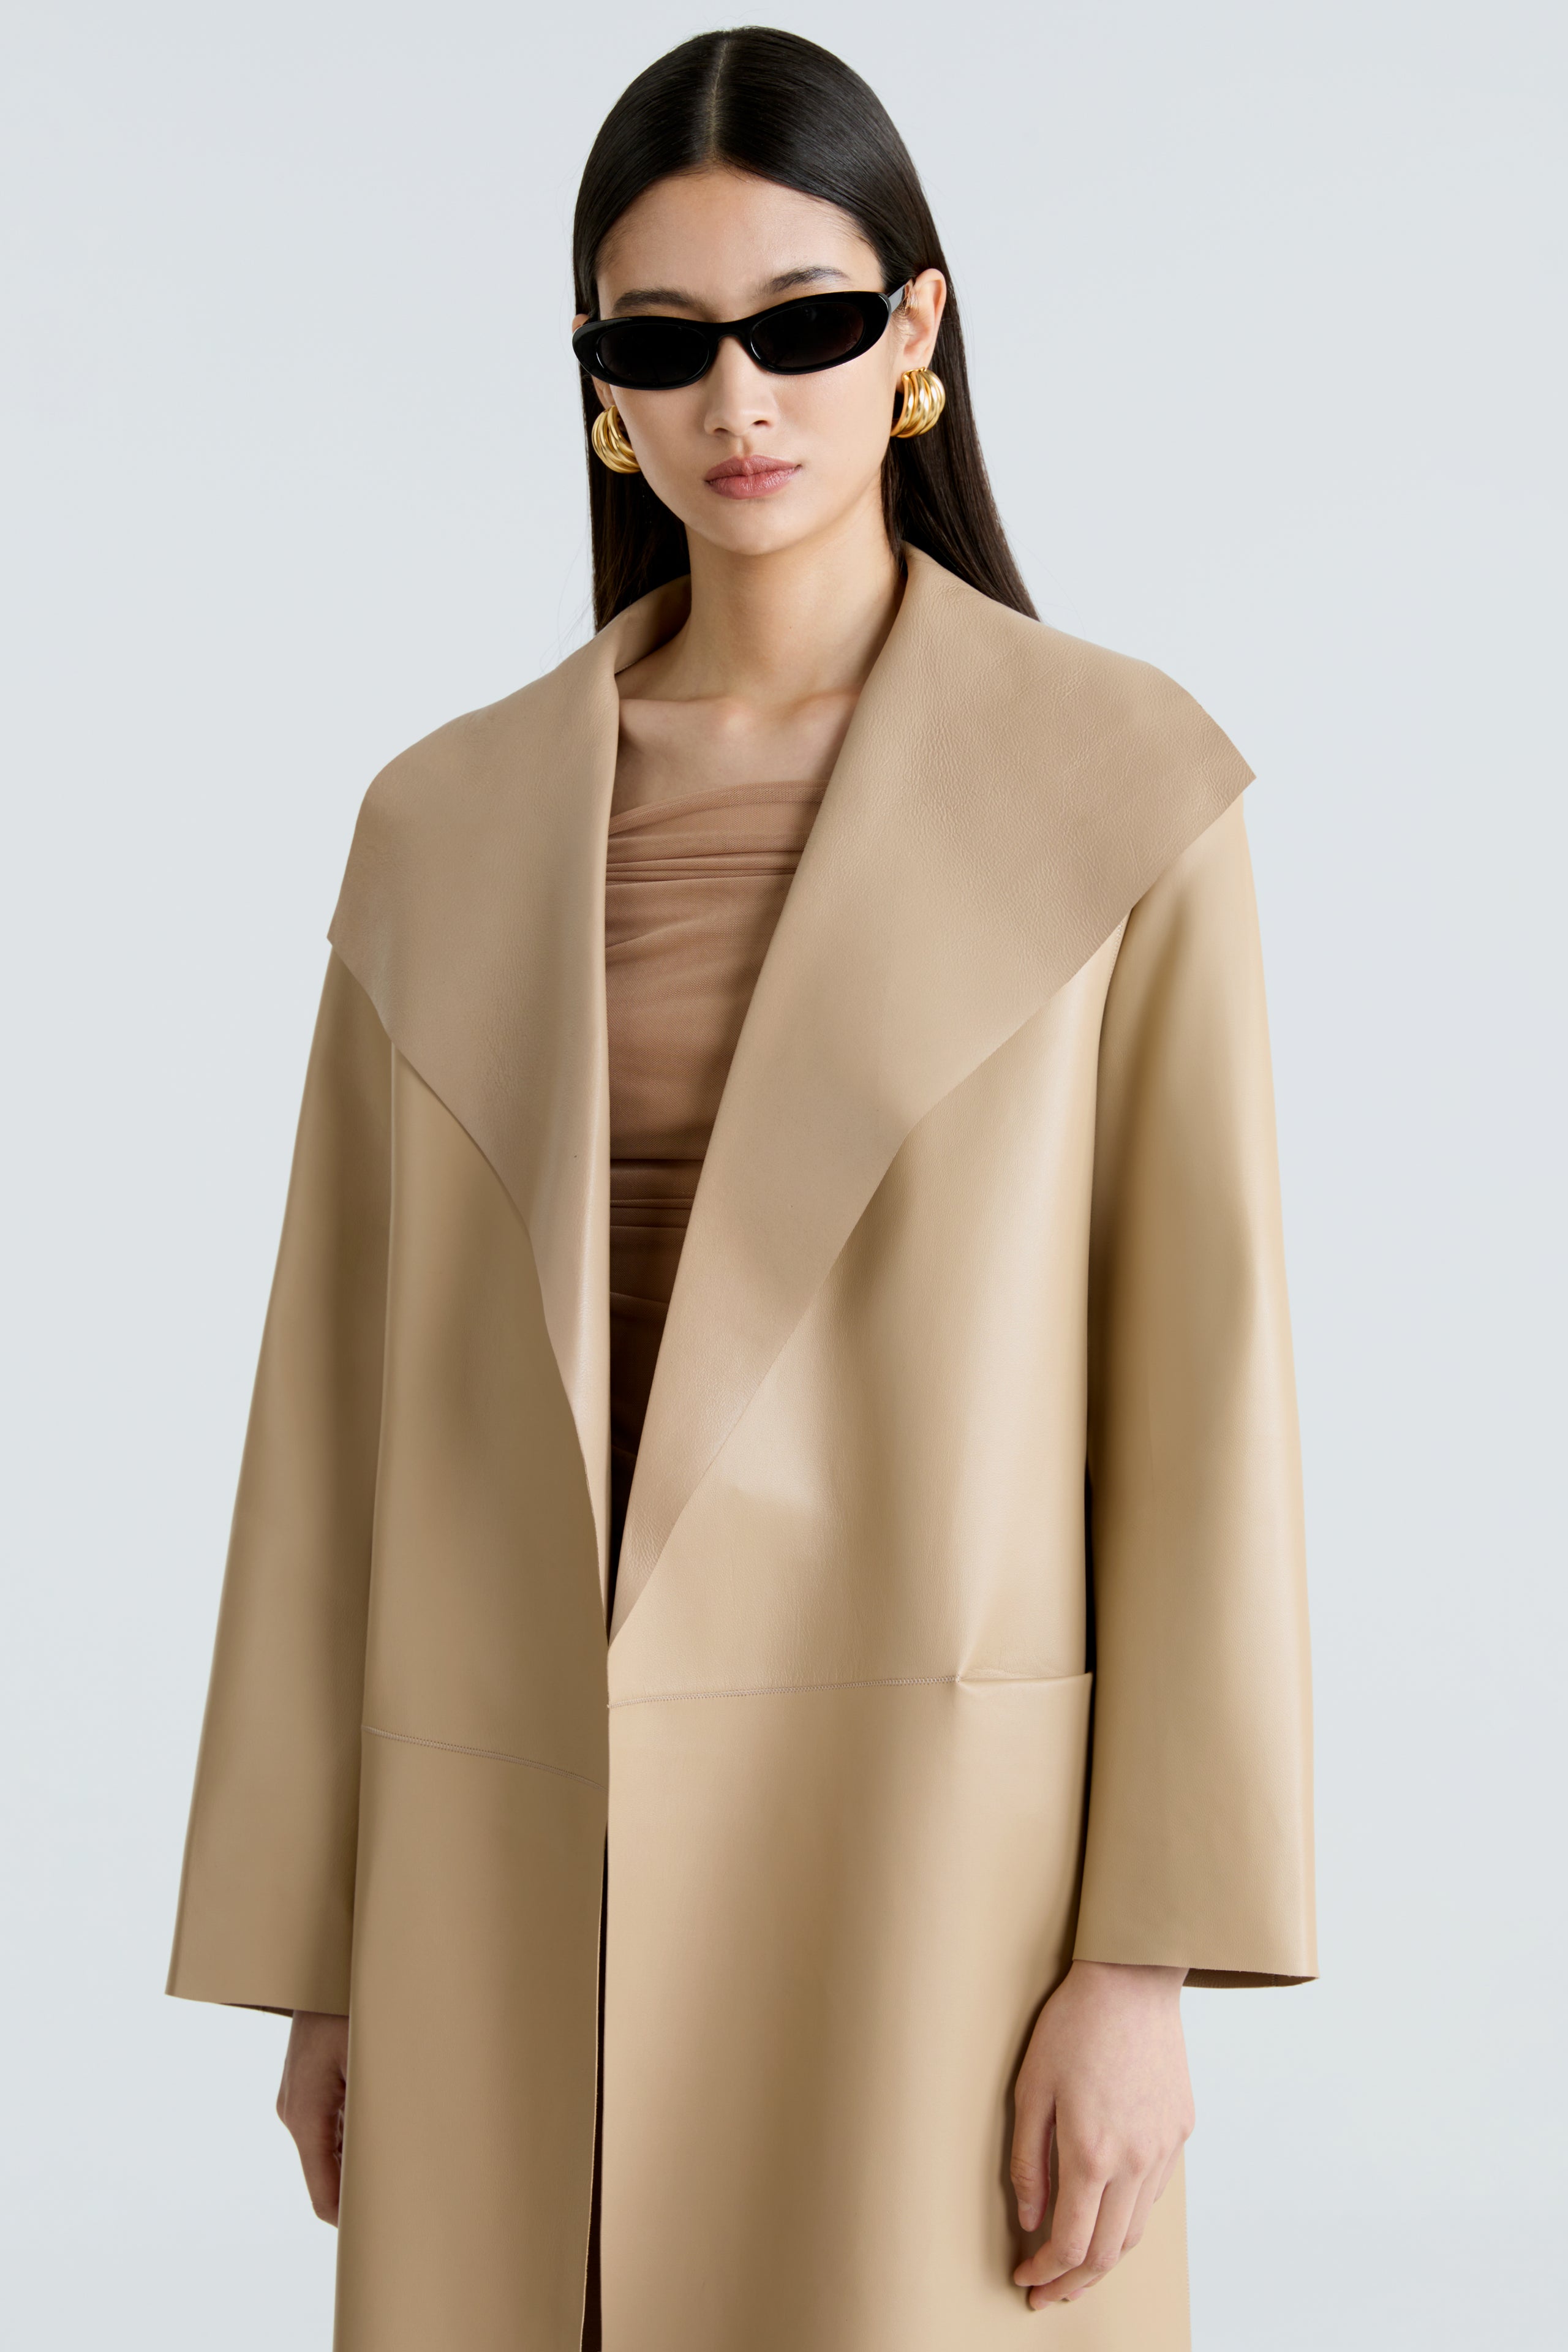 Model is wearing Nour Hammour's Brithday Coat Leather Beige - A Draped Leather Coat - Close Up